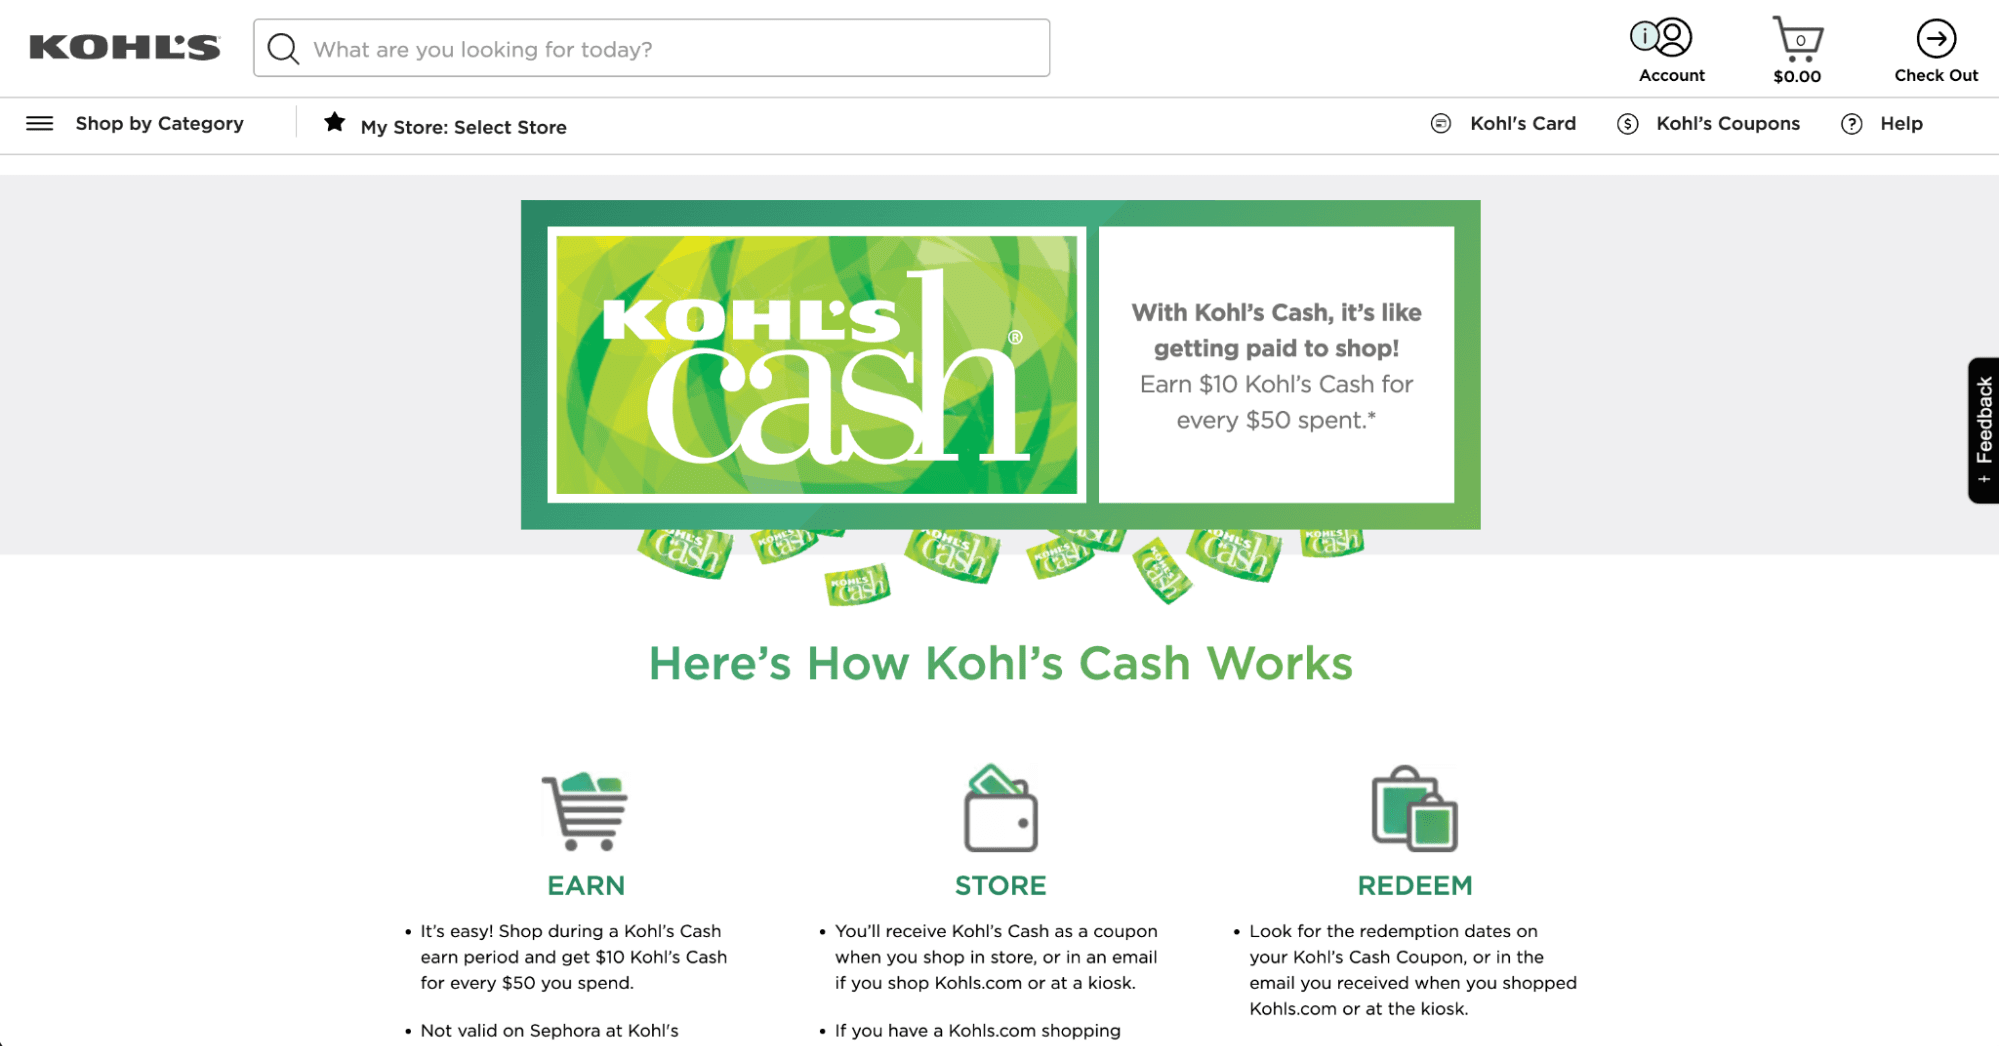 A screenshot from the Kohl's website informing customers how the Kohl's Cash program works